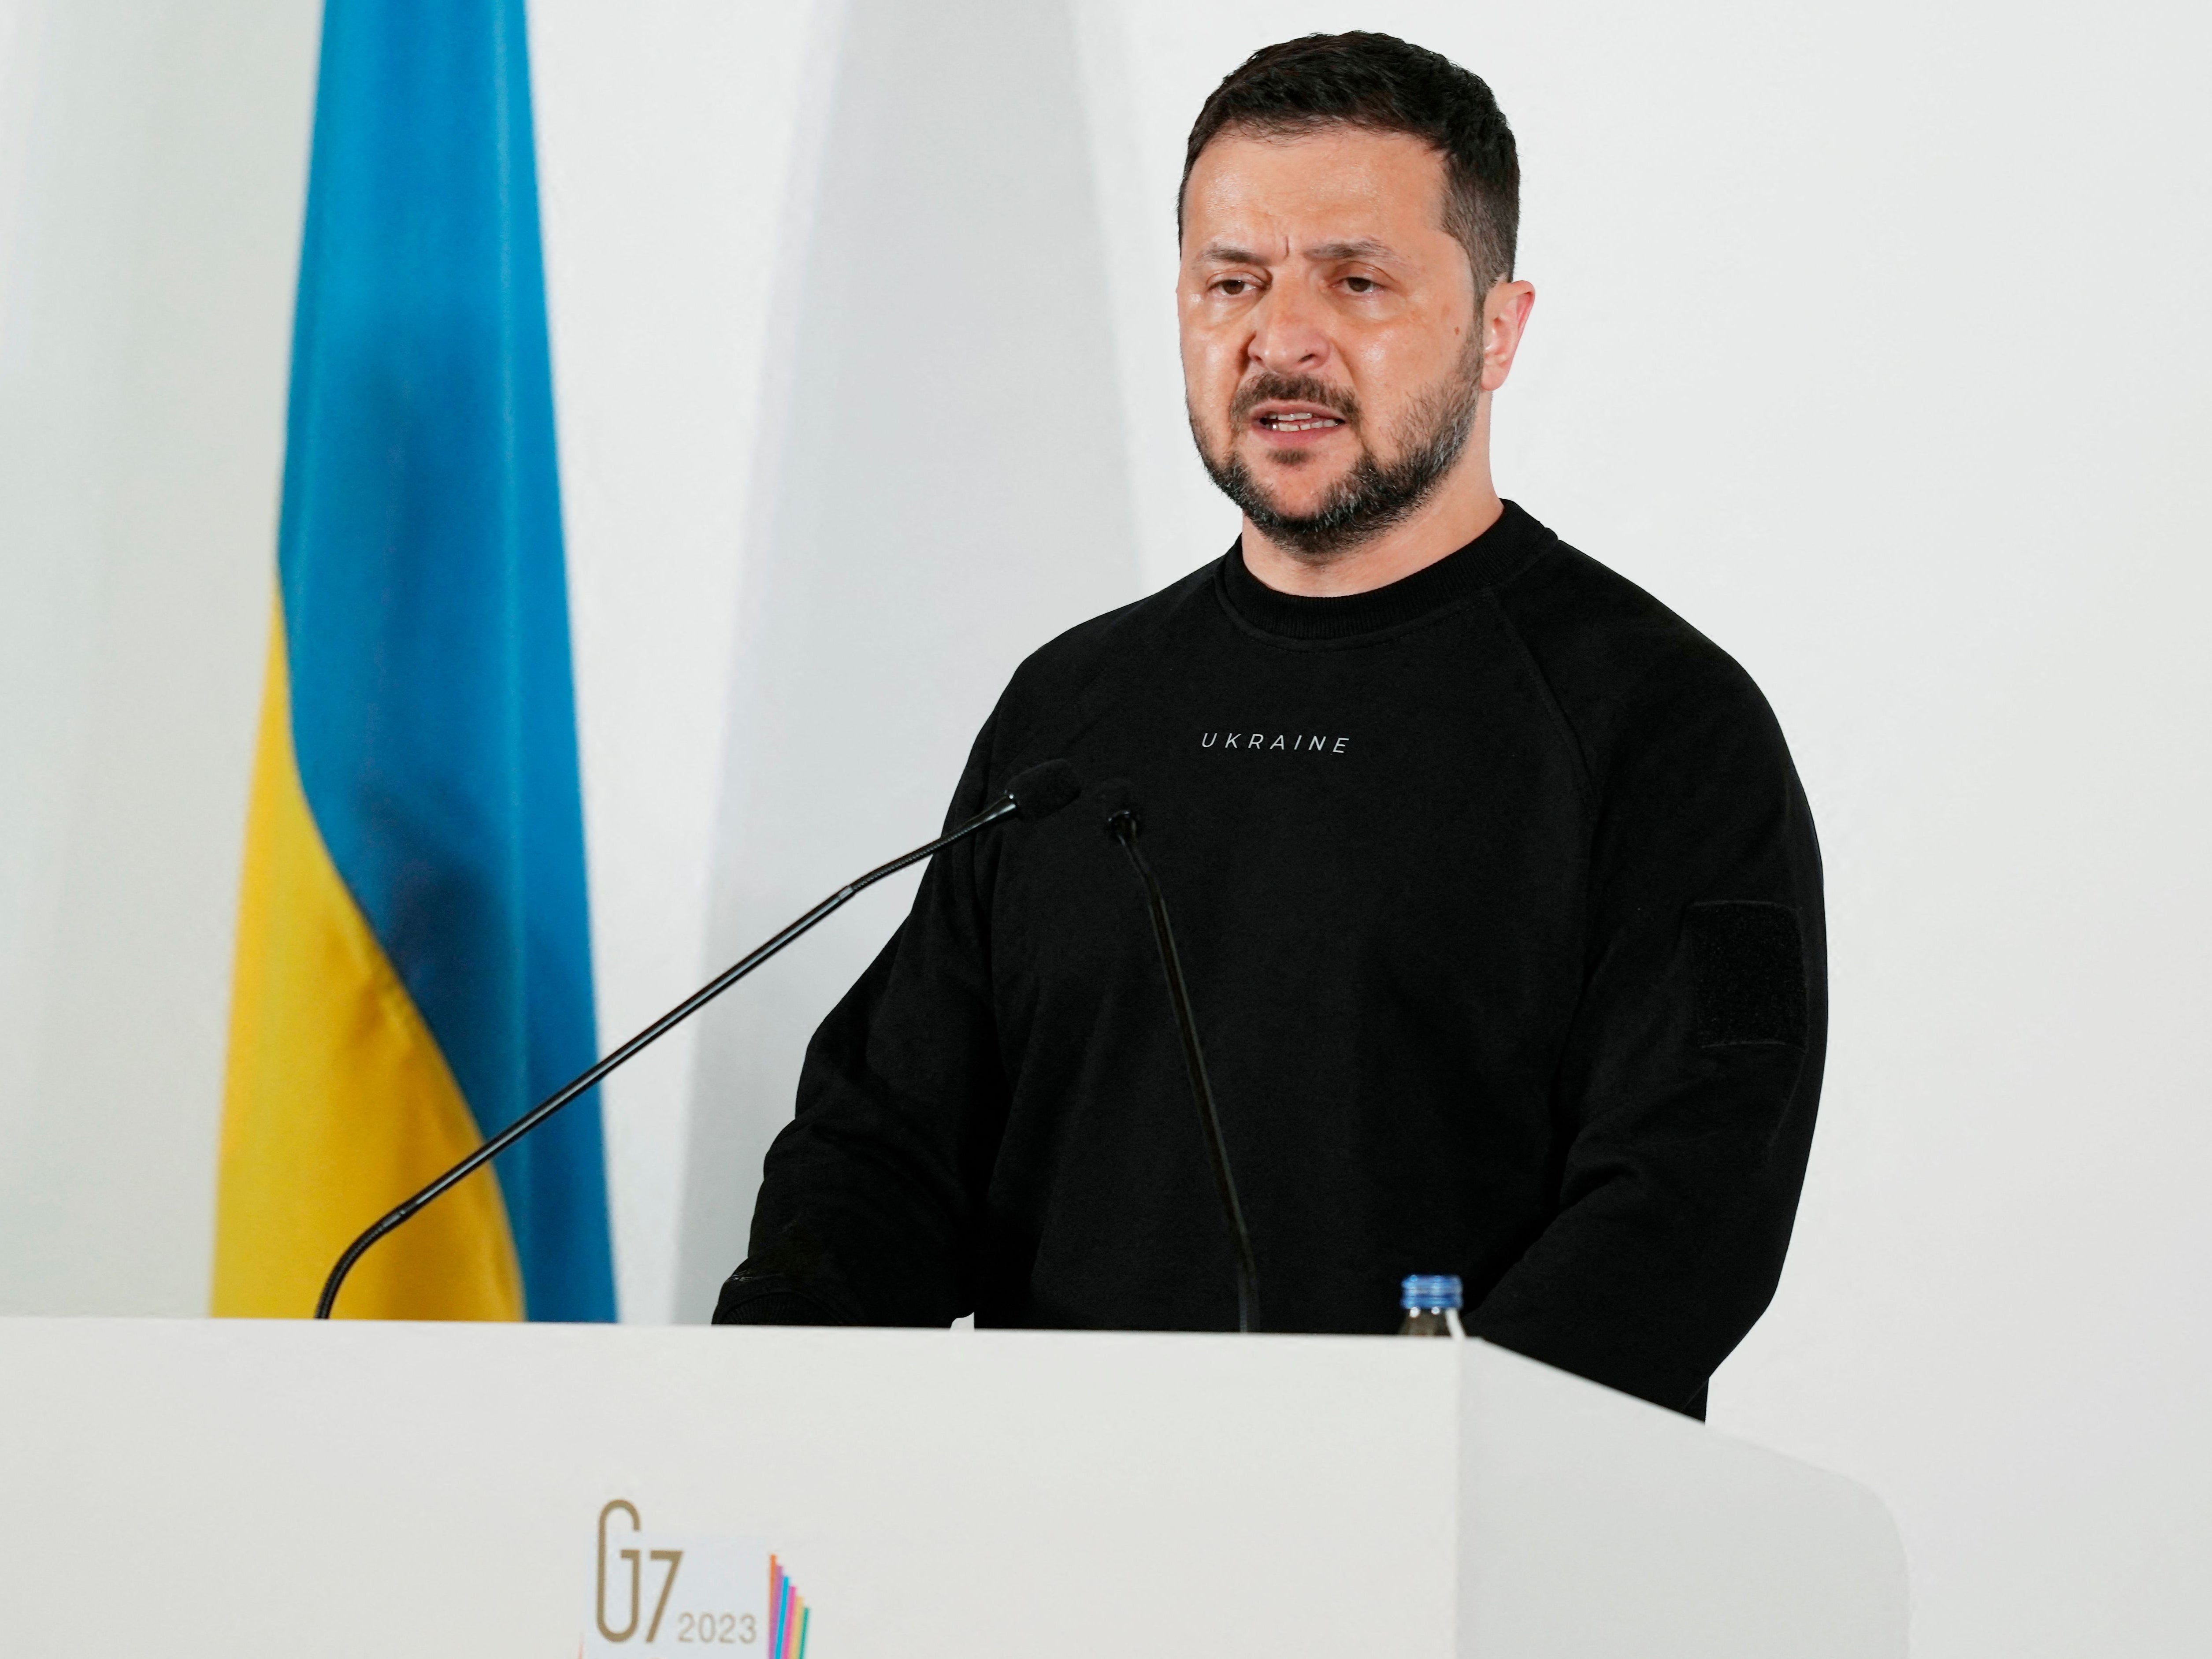 <p>Volodymyr Zelensky speaking at the G7 conference</p><p>” height=”3765″ width=”5020″ layout=”responsive” class=”i-amphtml-layout-responsive i-amphtml-layout-size-defined” i-amphtml-layout=”responsive”><i-amphtml-sizer slot=